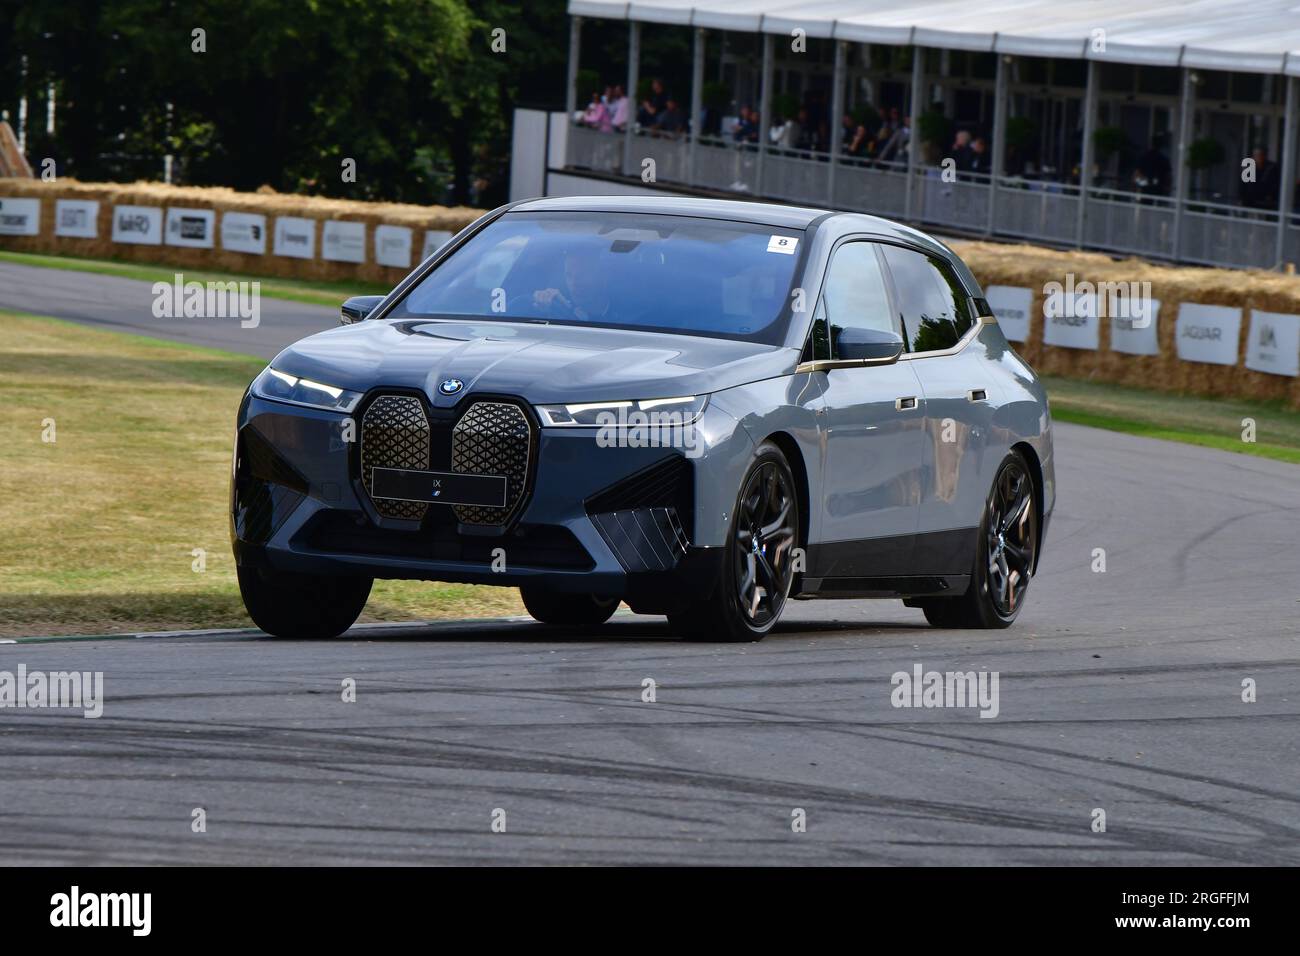 BMW iX, Manufacturer Batch, an opportunity to see a variety of modern vehicles along with new models from a wide range of new and established manufact Stock Photo